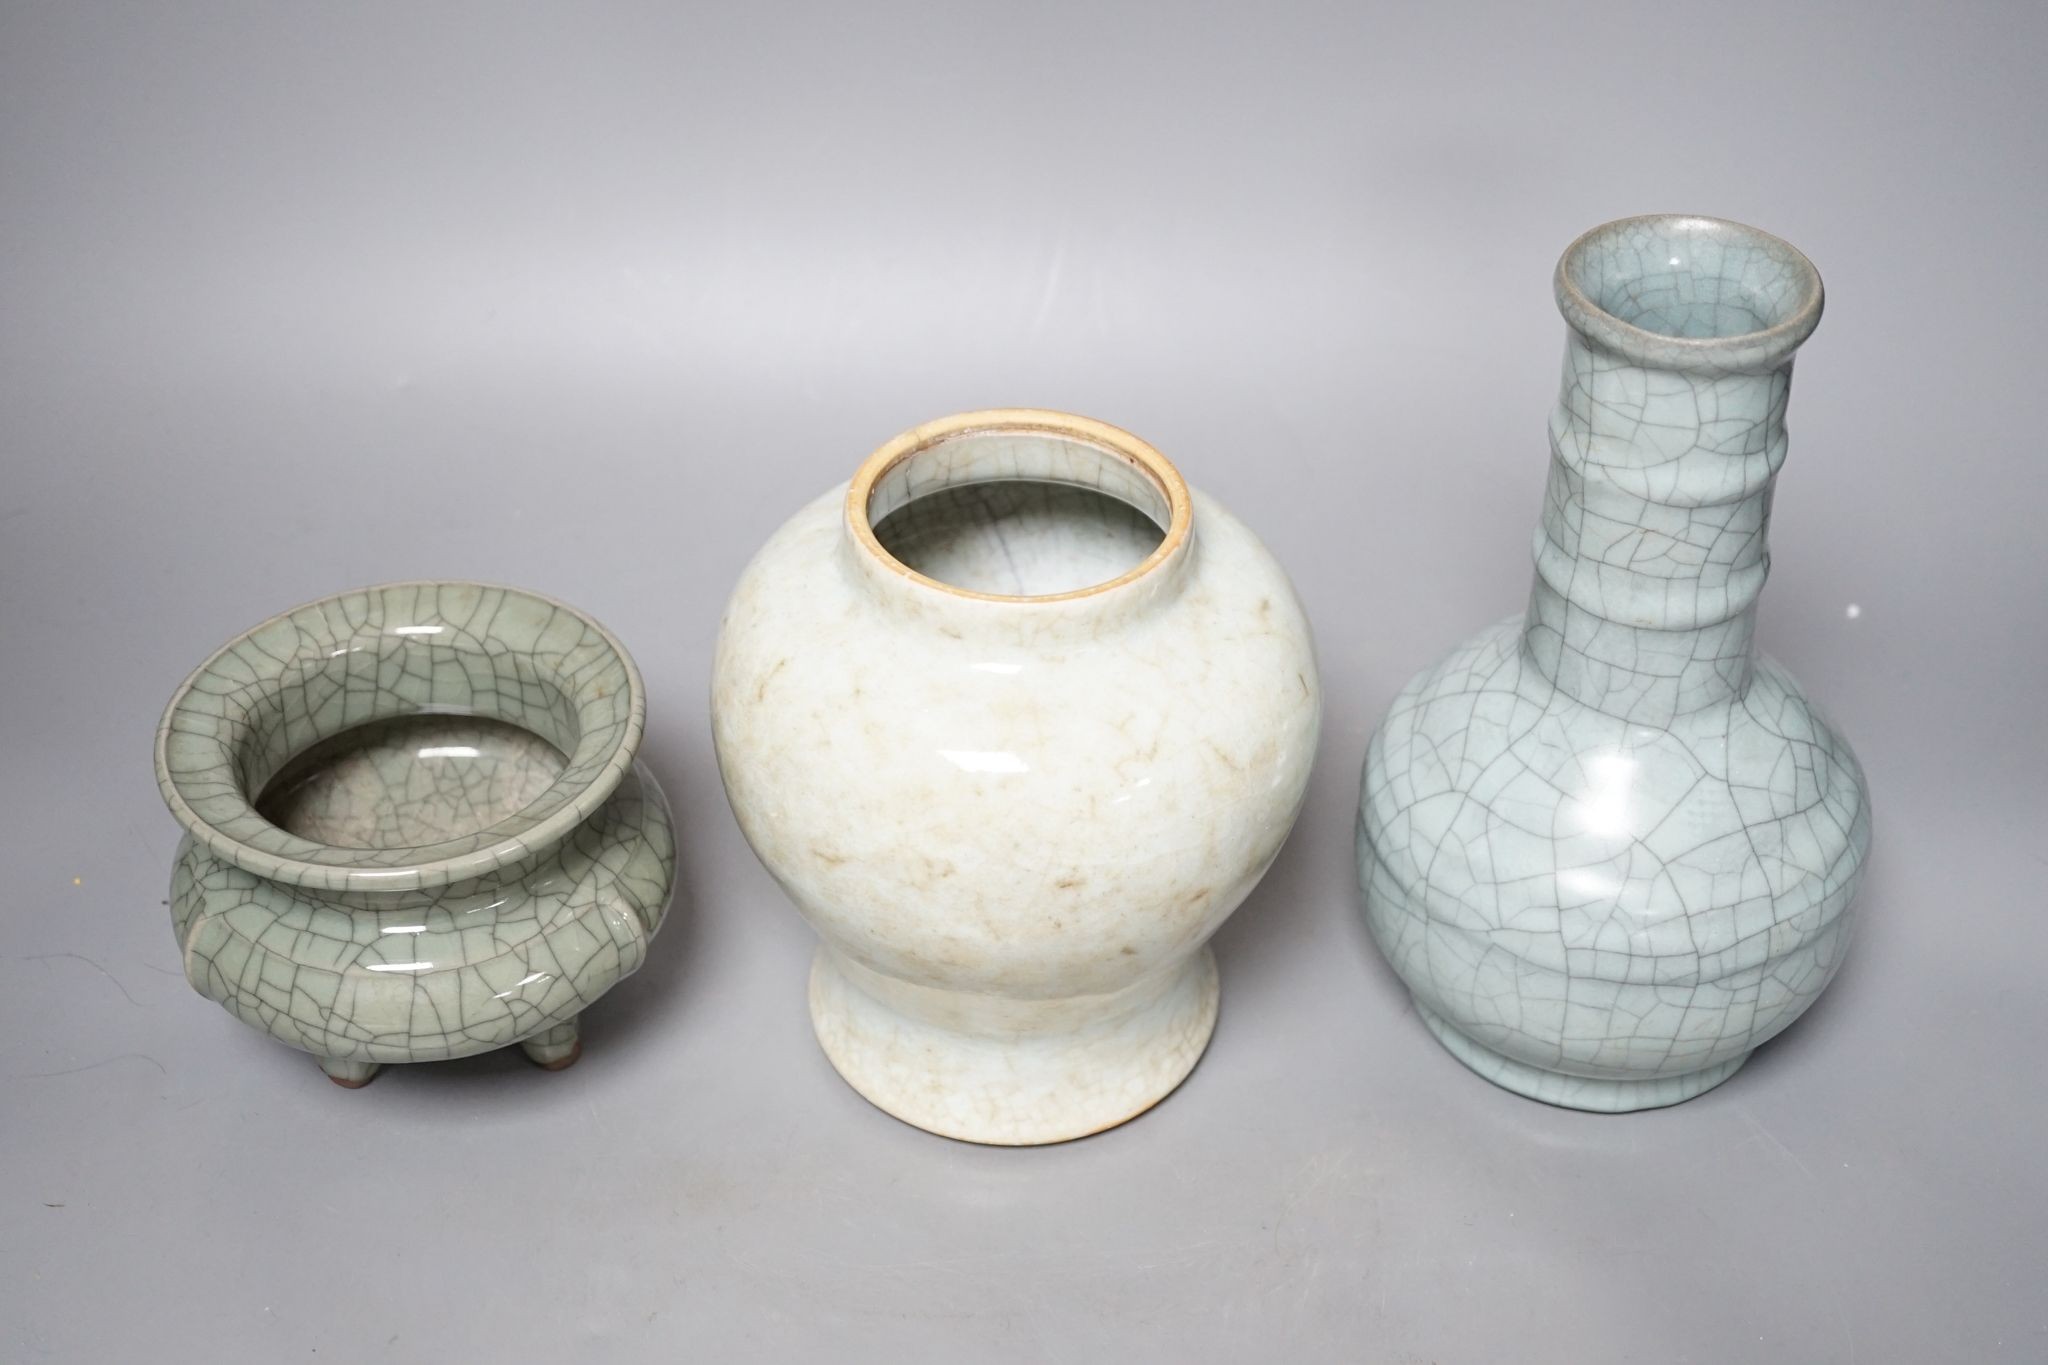 Three Chinese crackle glaze vases or vessels, 19th century and later, tallest 22cm